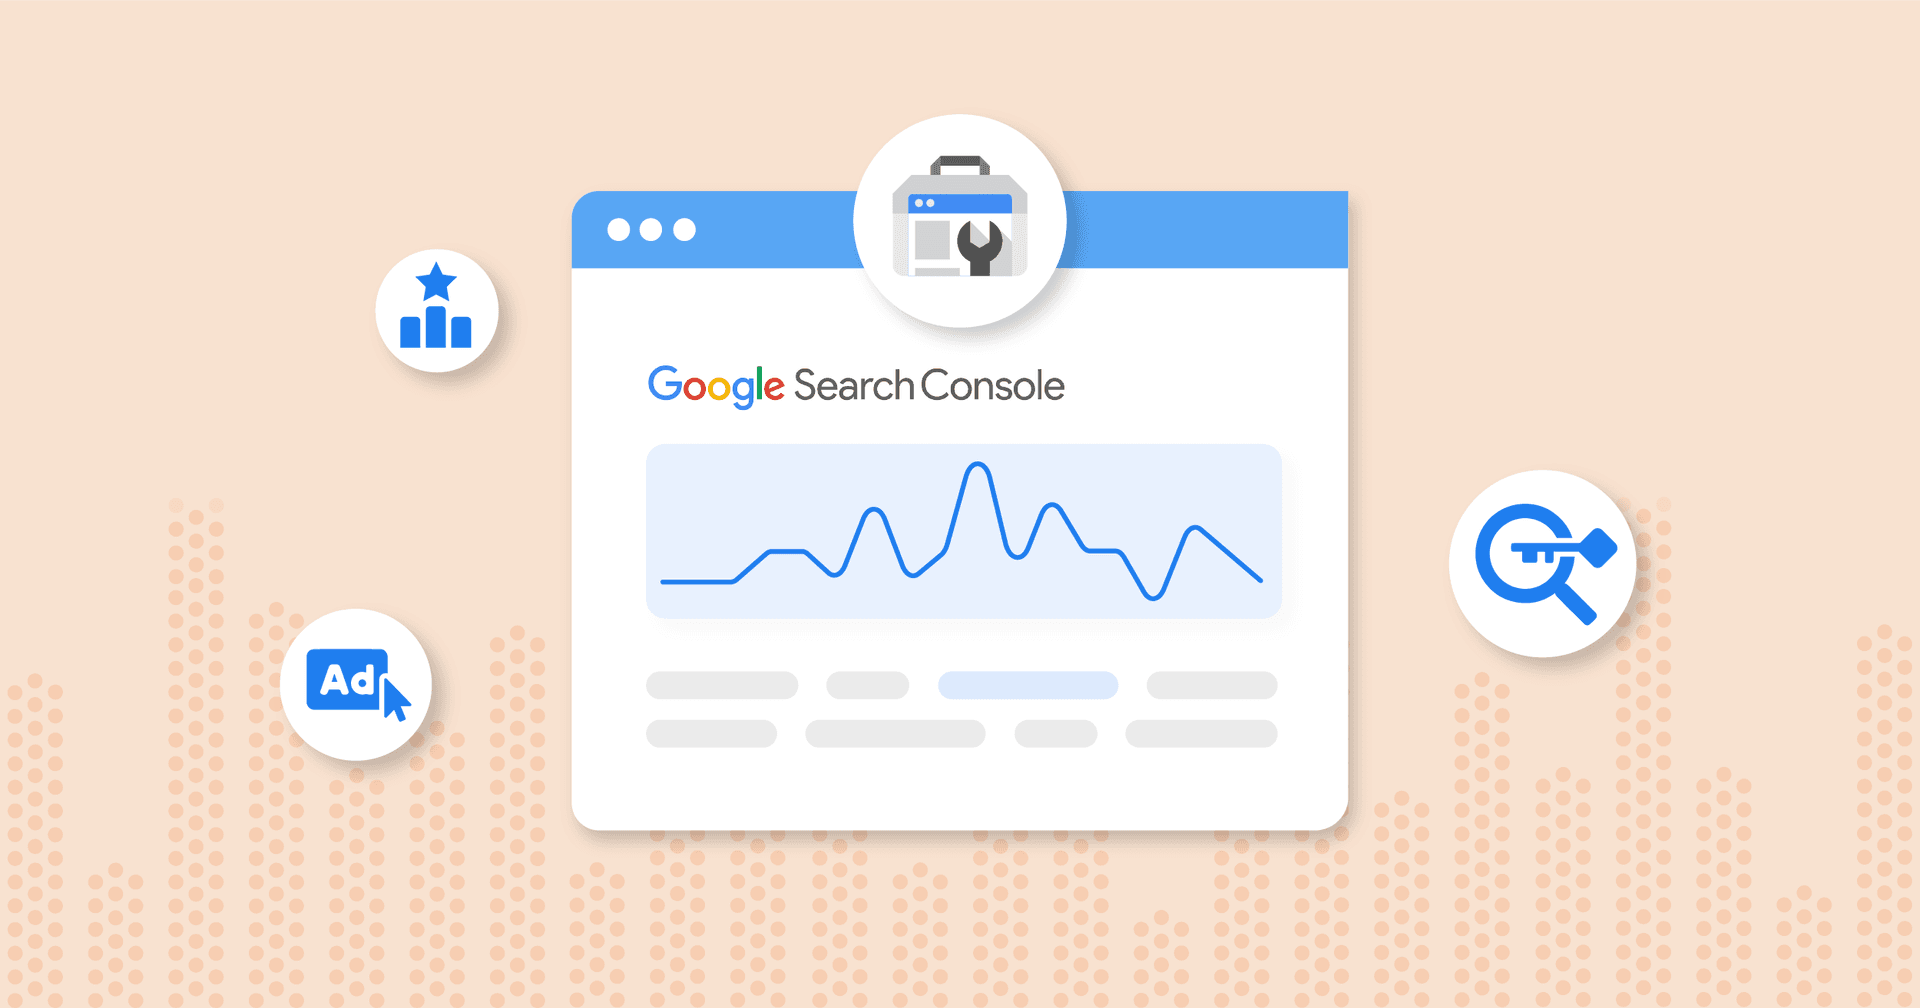 Google Search Console Analytics to Track

